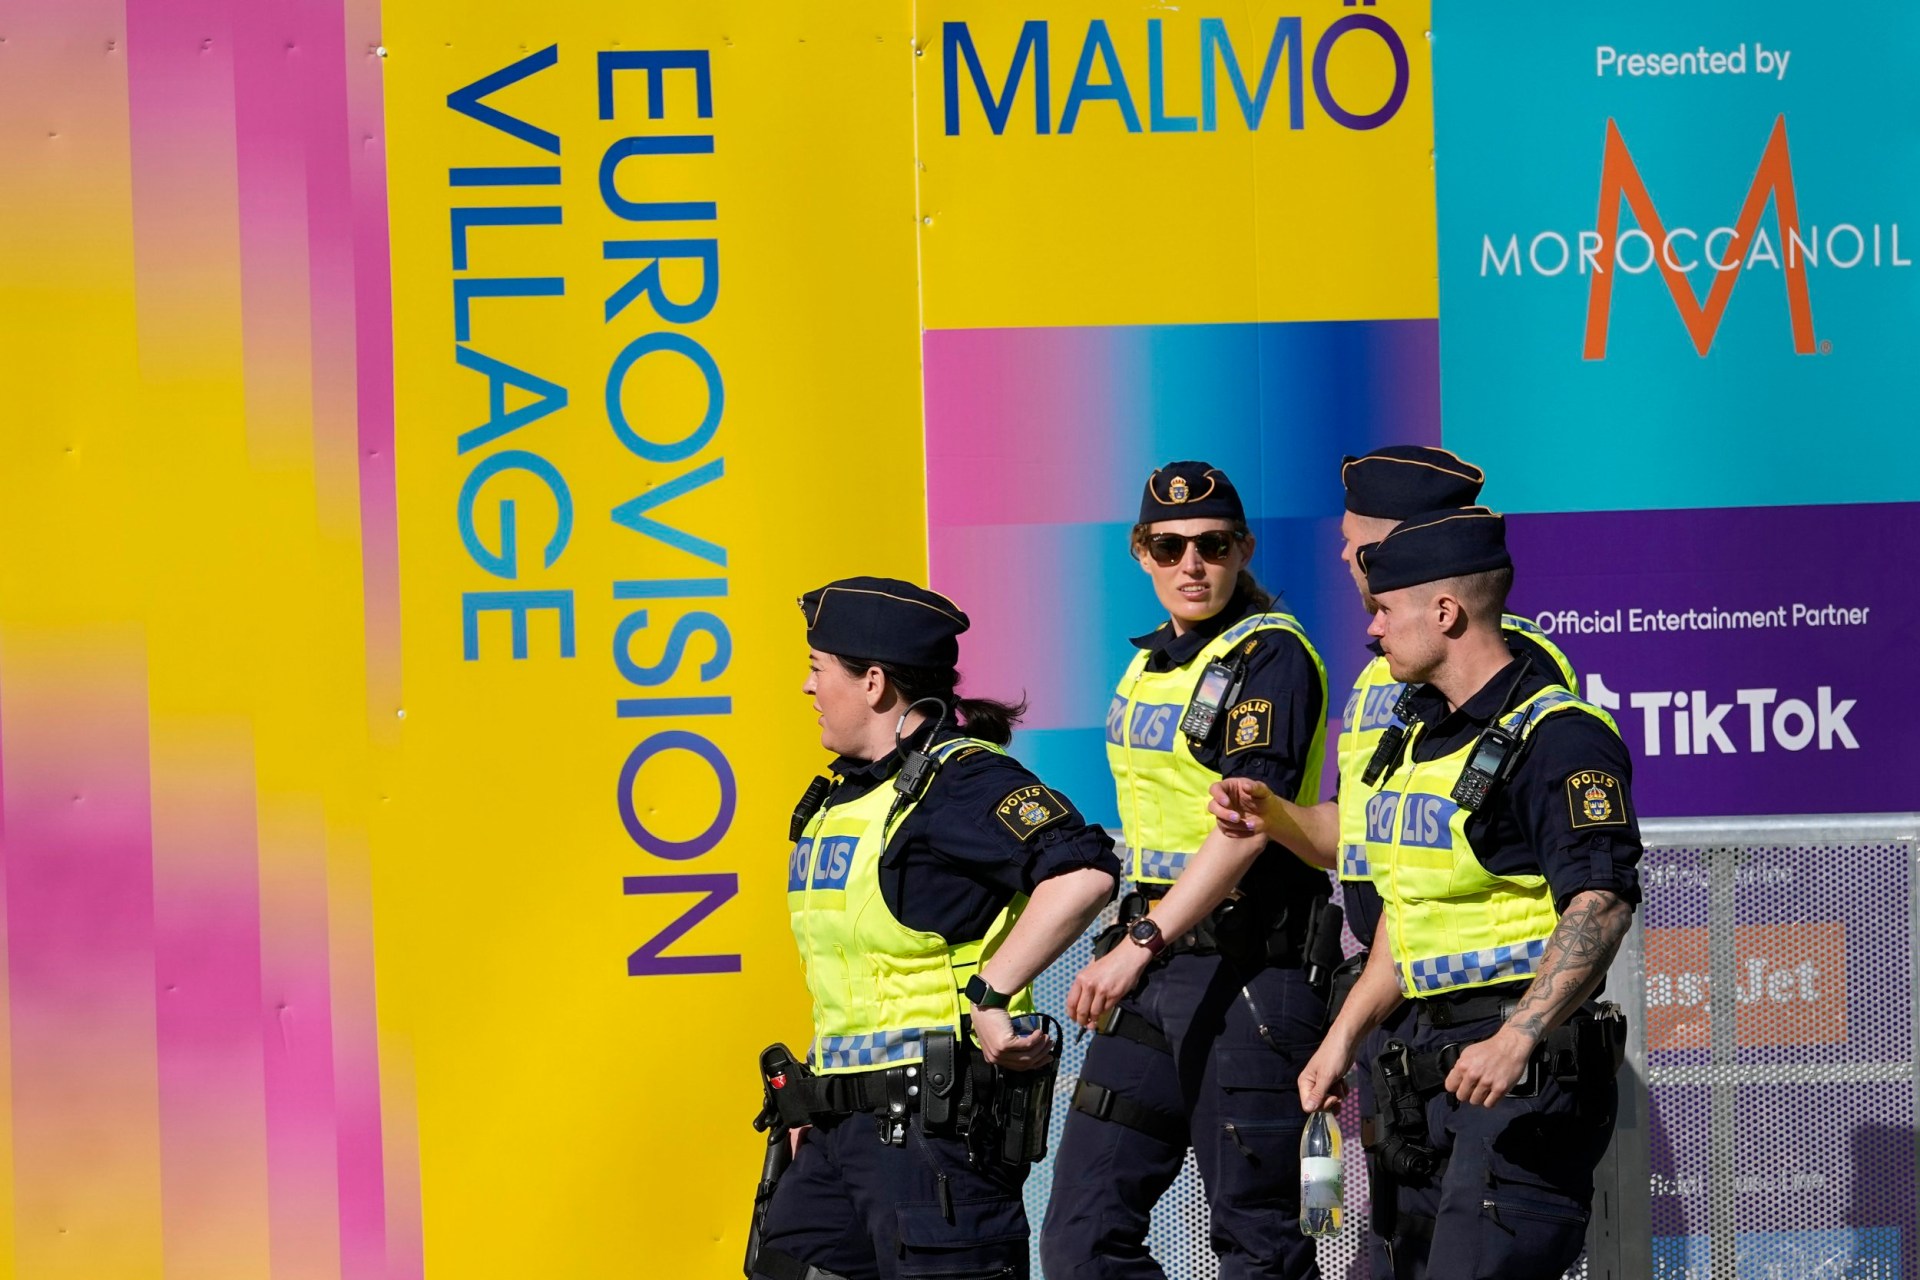 eurovision tensions hit fever pitch. but police are watching like never before